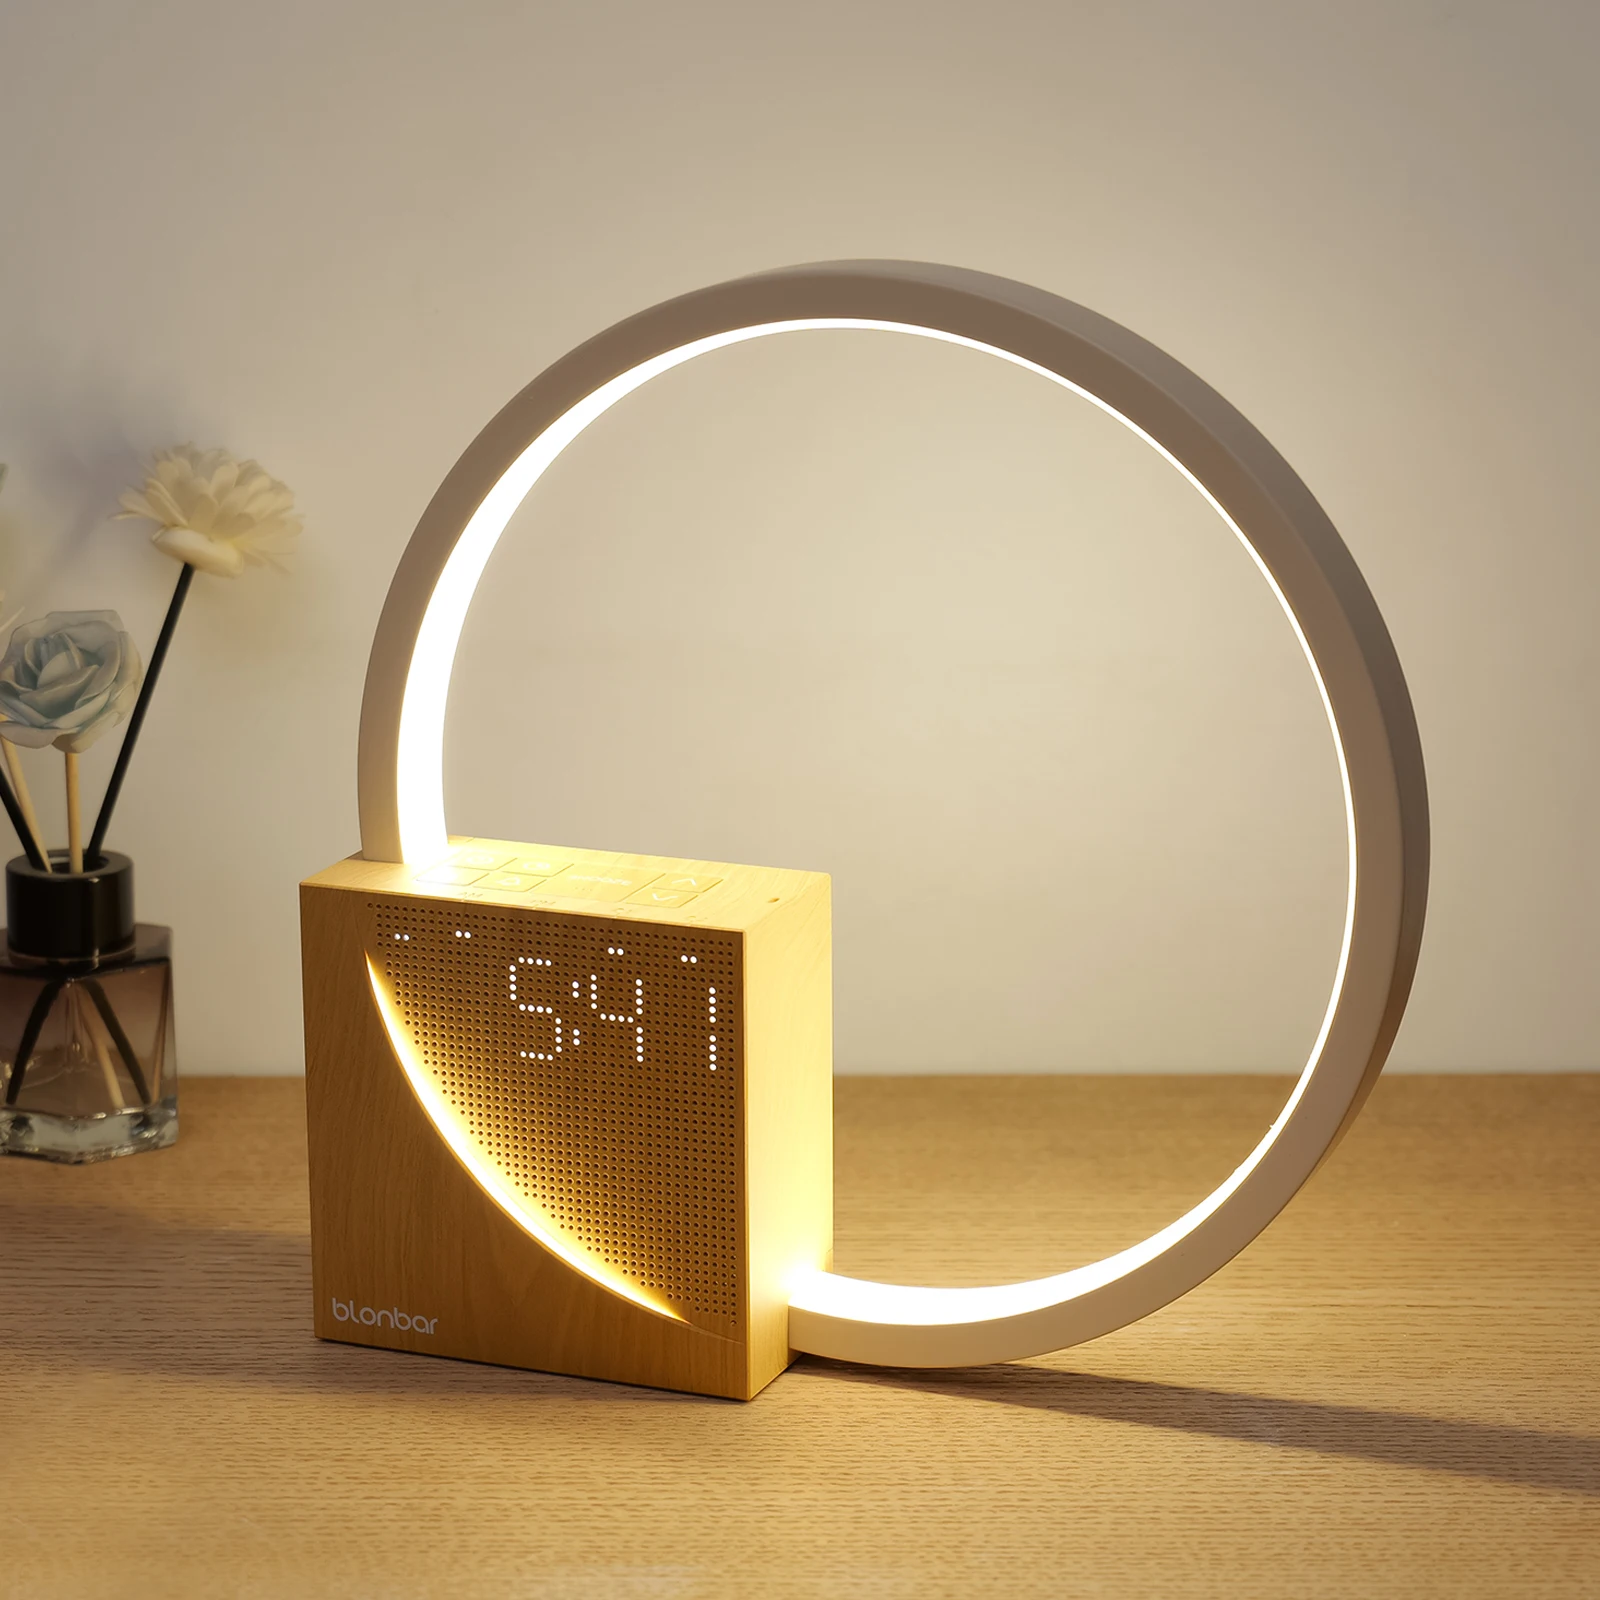 blonbar Bedside Lamp, Touch Lamps Bedside with 10W USB Charging Port, 10 - $66.14